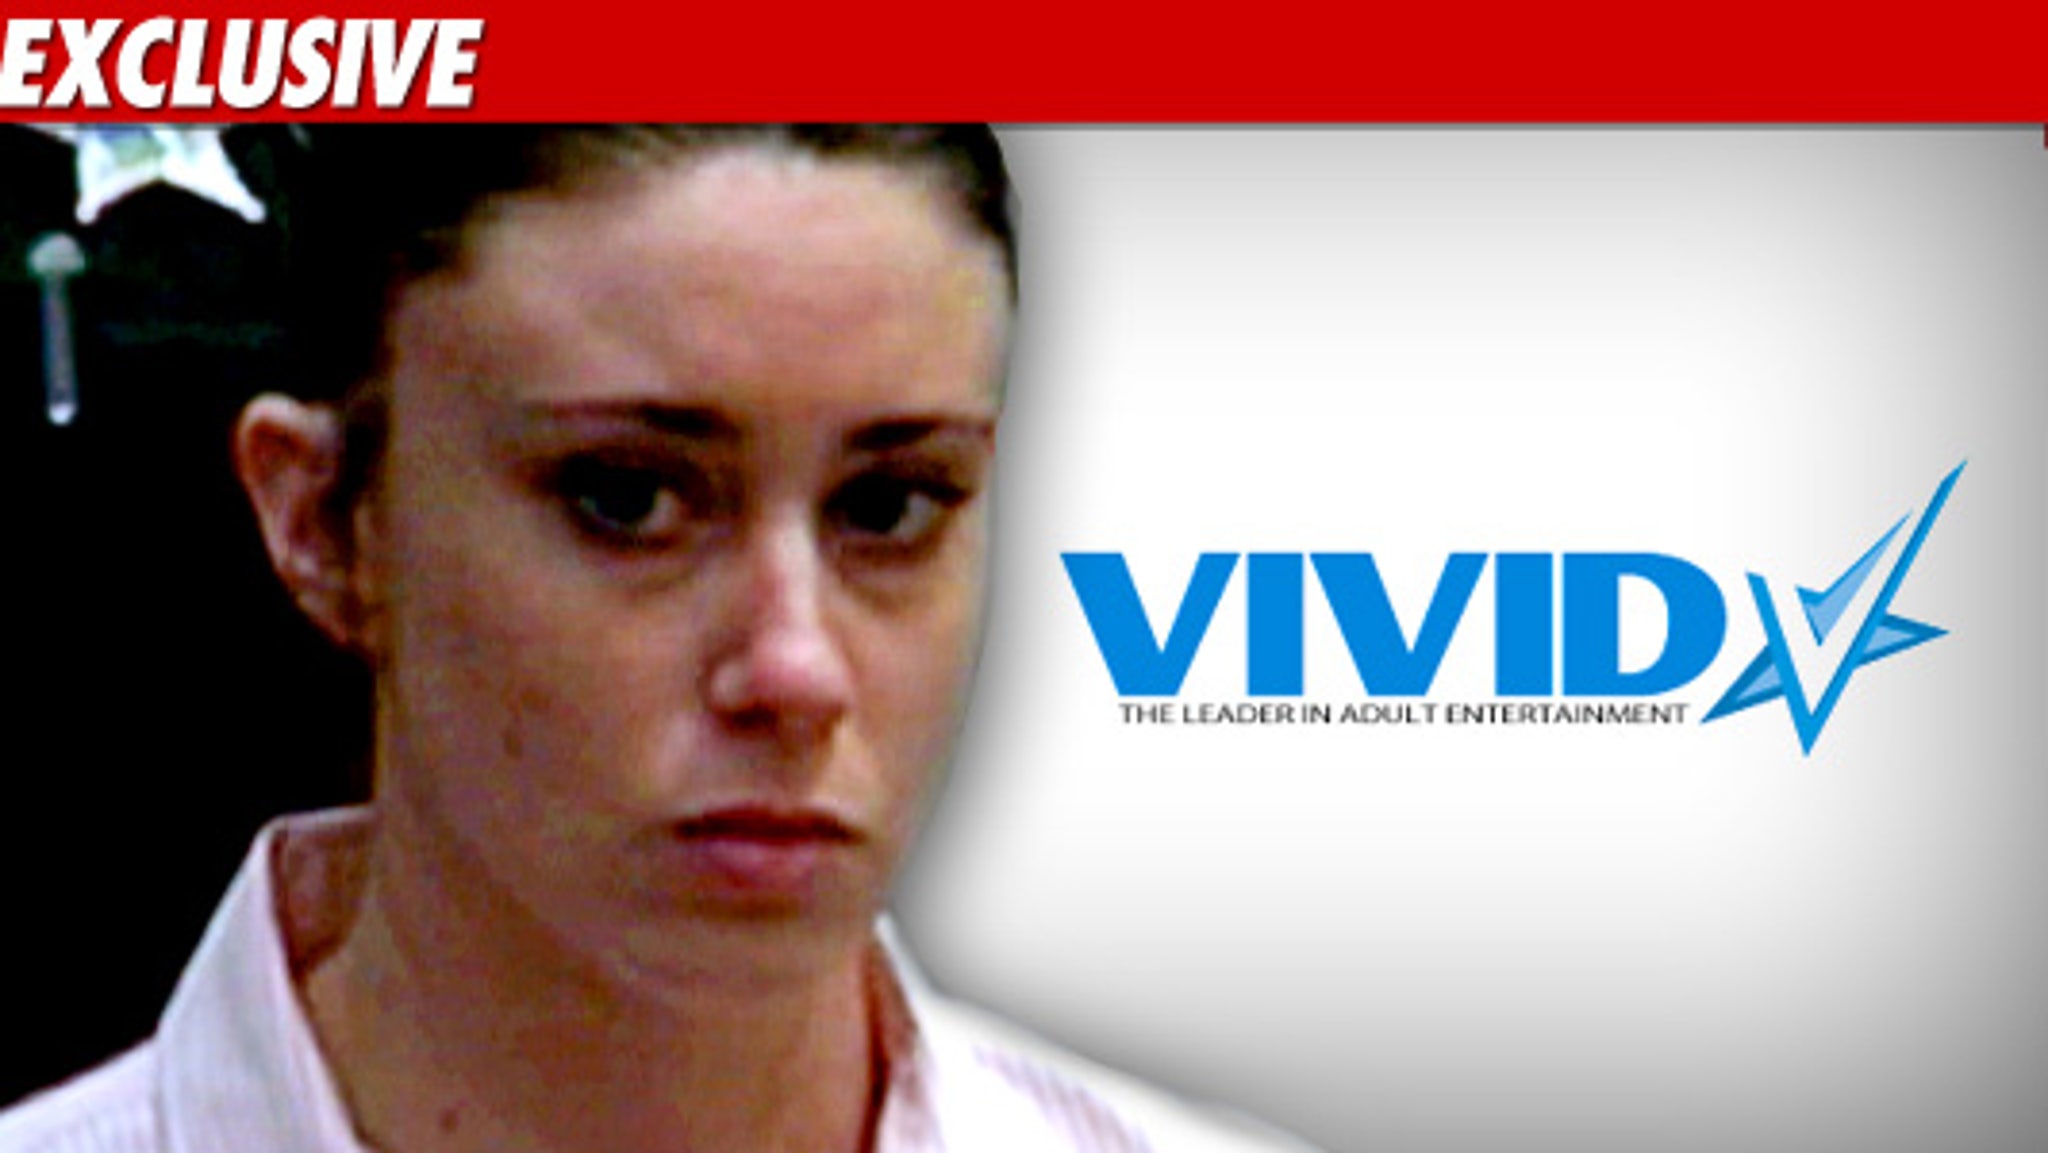 Porn King: Casey Anthony Could Be Killer XXX Star